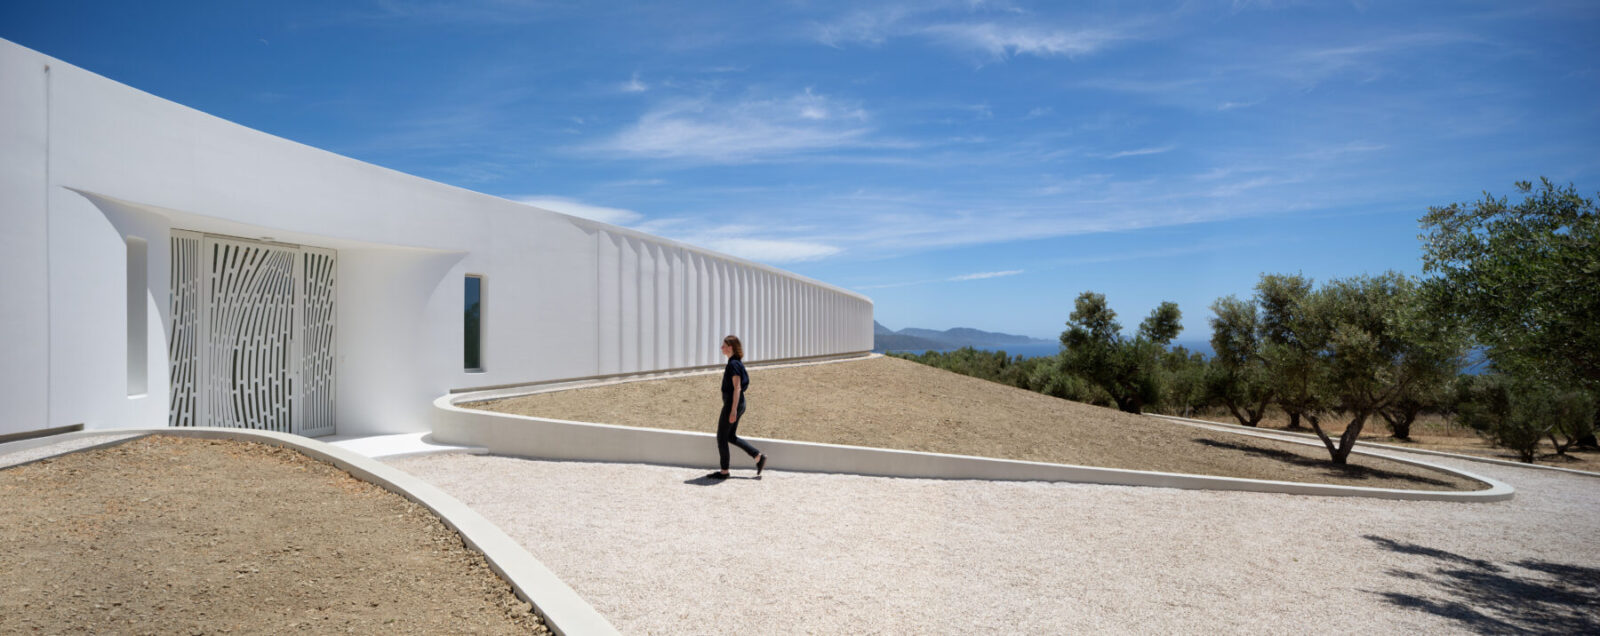 Archisearch KHI House & Art Space in Methoni, Greece | LASSA Architects